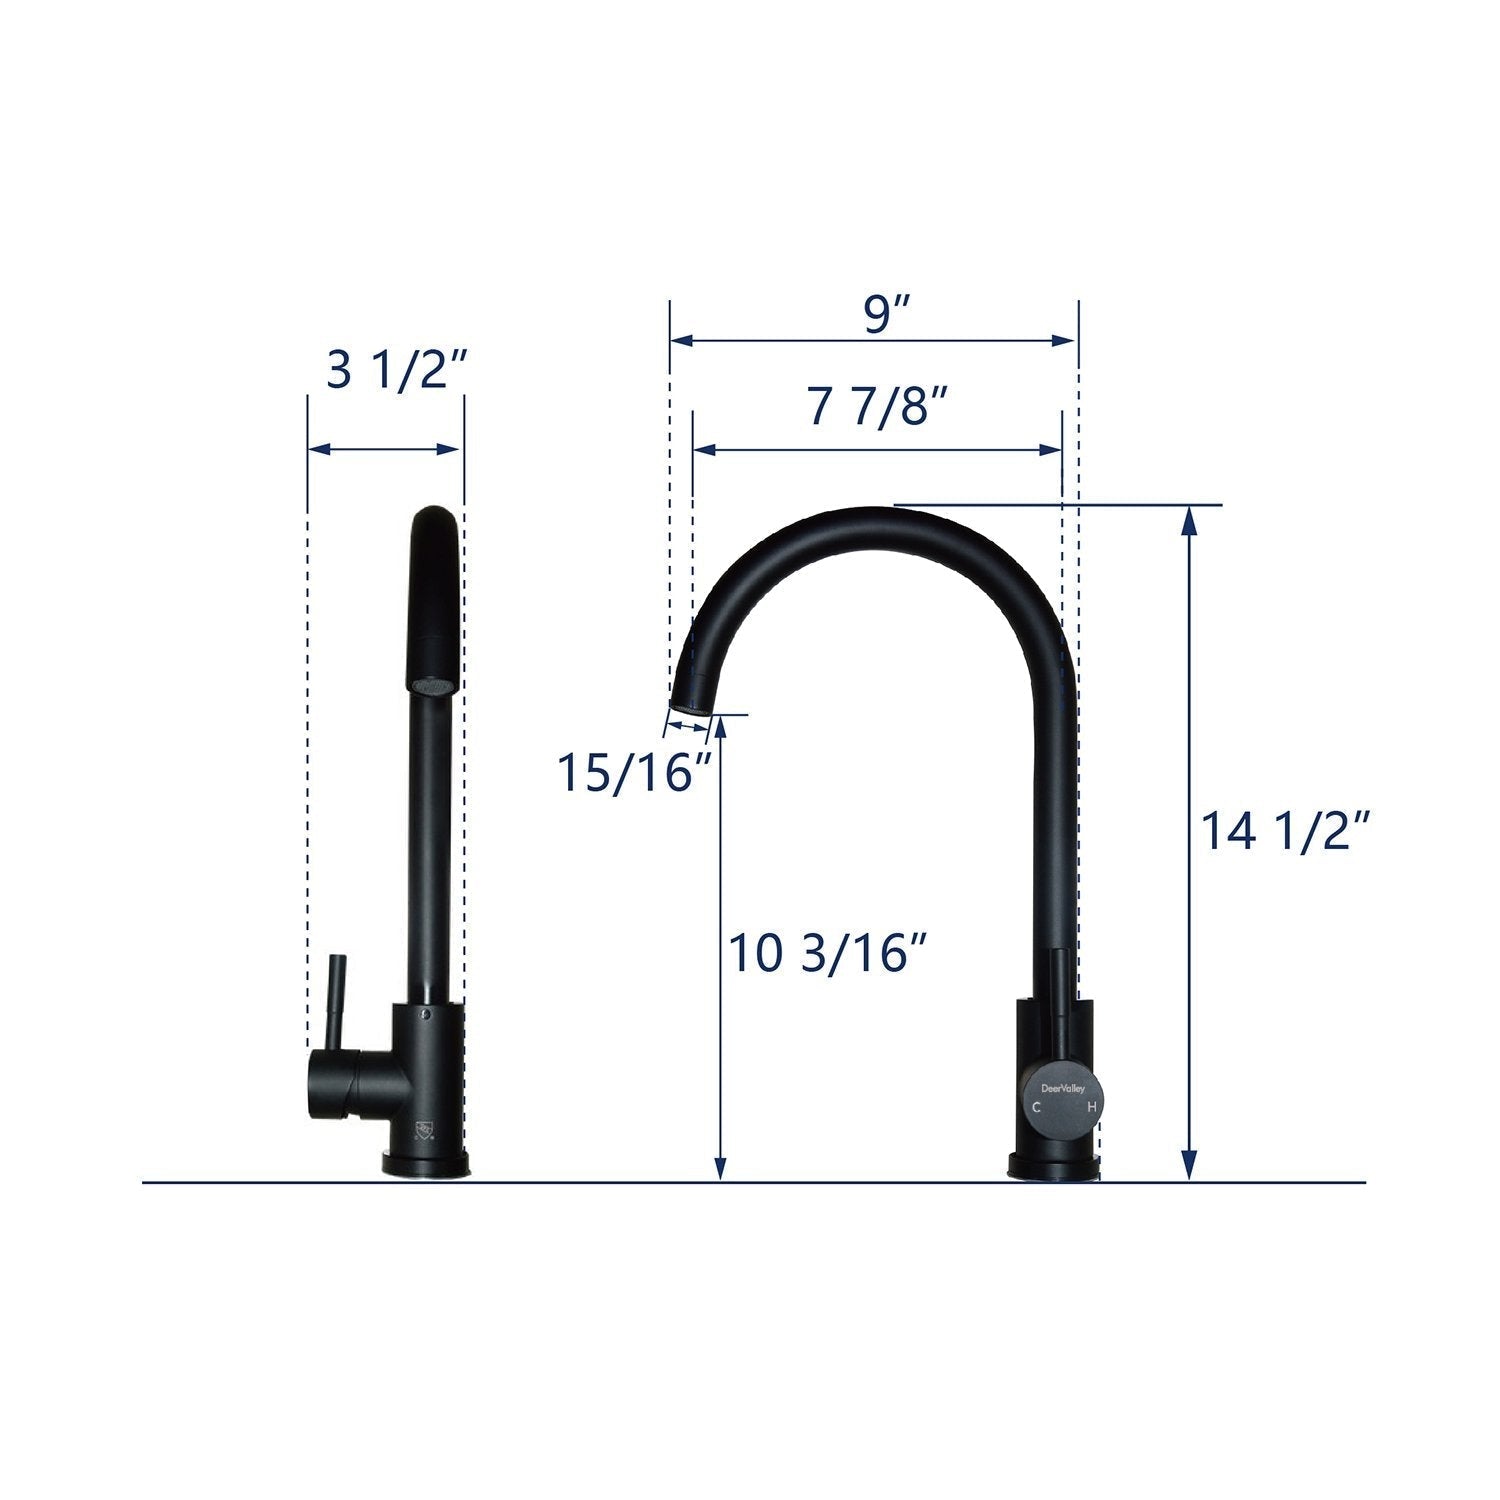 DeerValley Perch 15" Black Stainless Steel Single Handle Kitchen Faucet